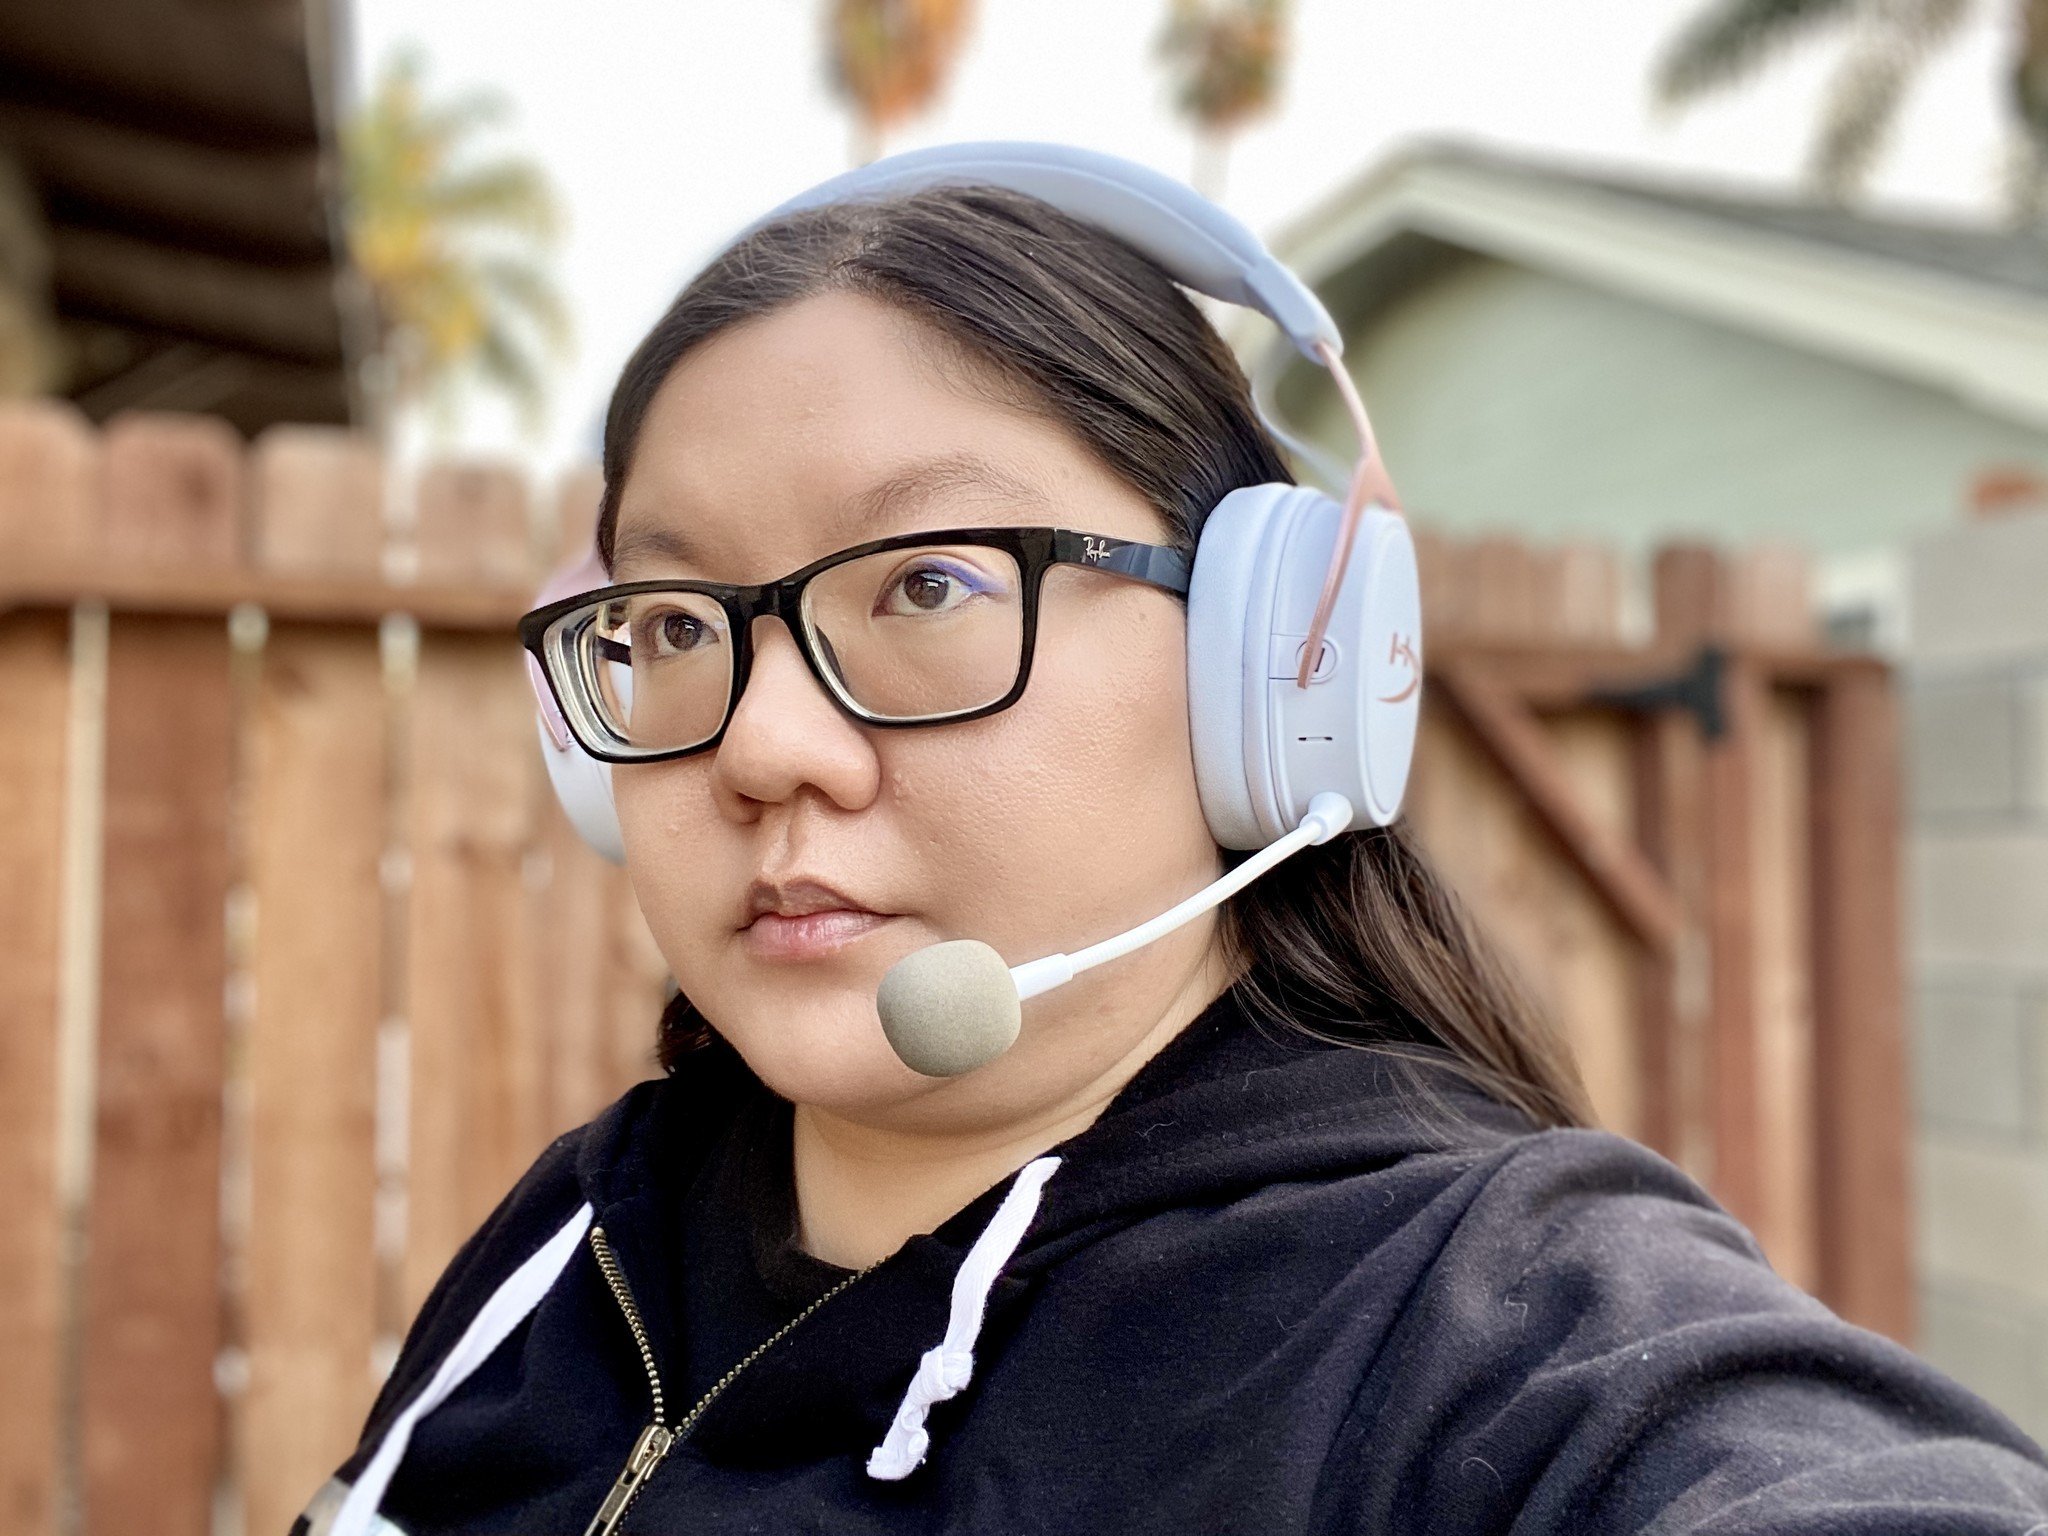 Christine wears HyperX Cloud MIX Rose Gold headphones with mic